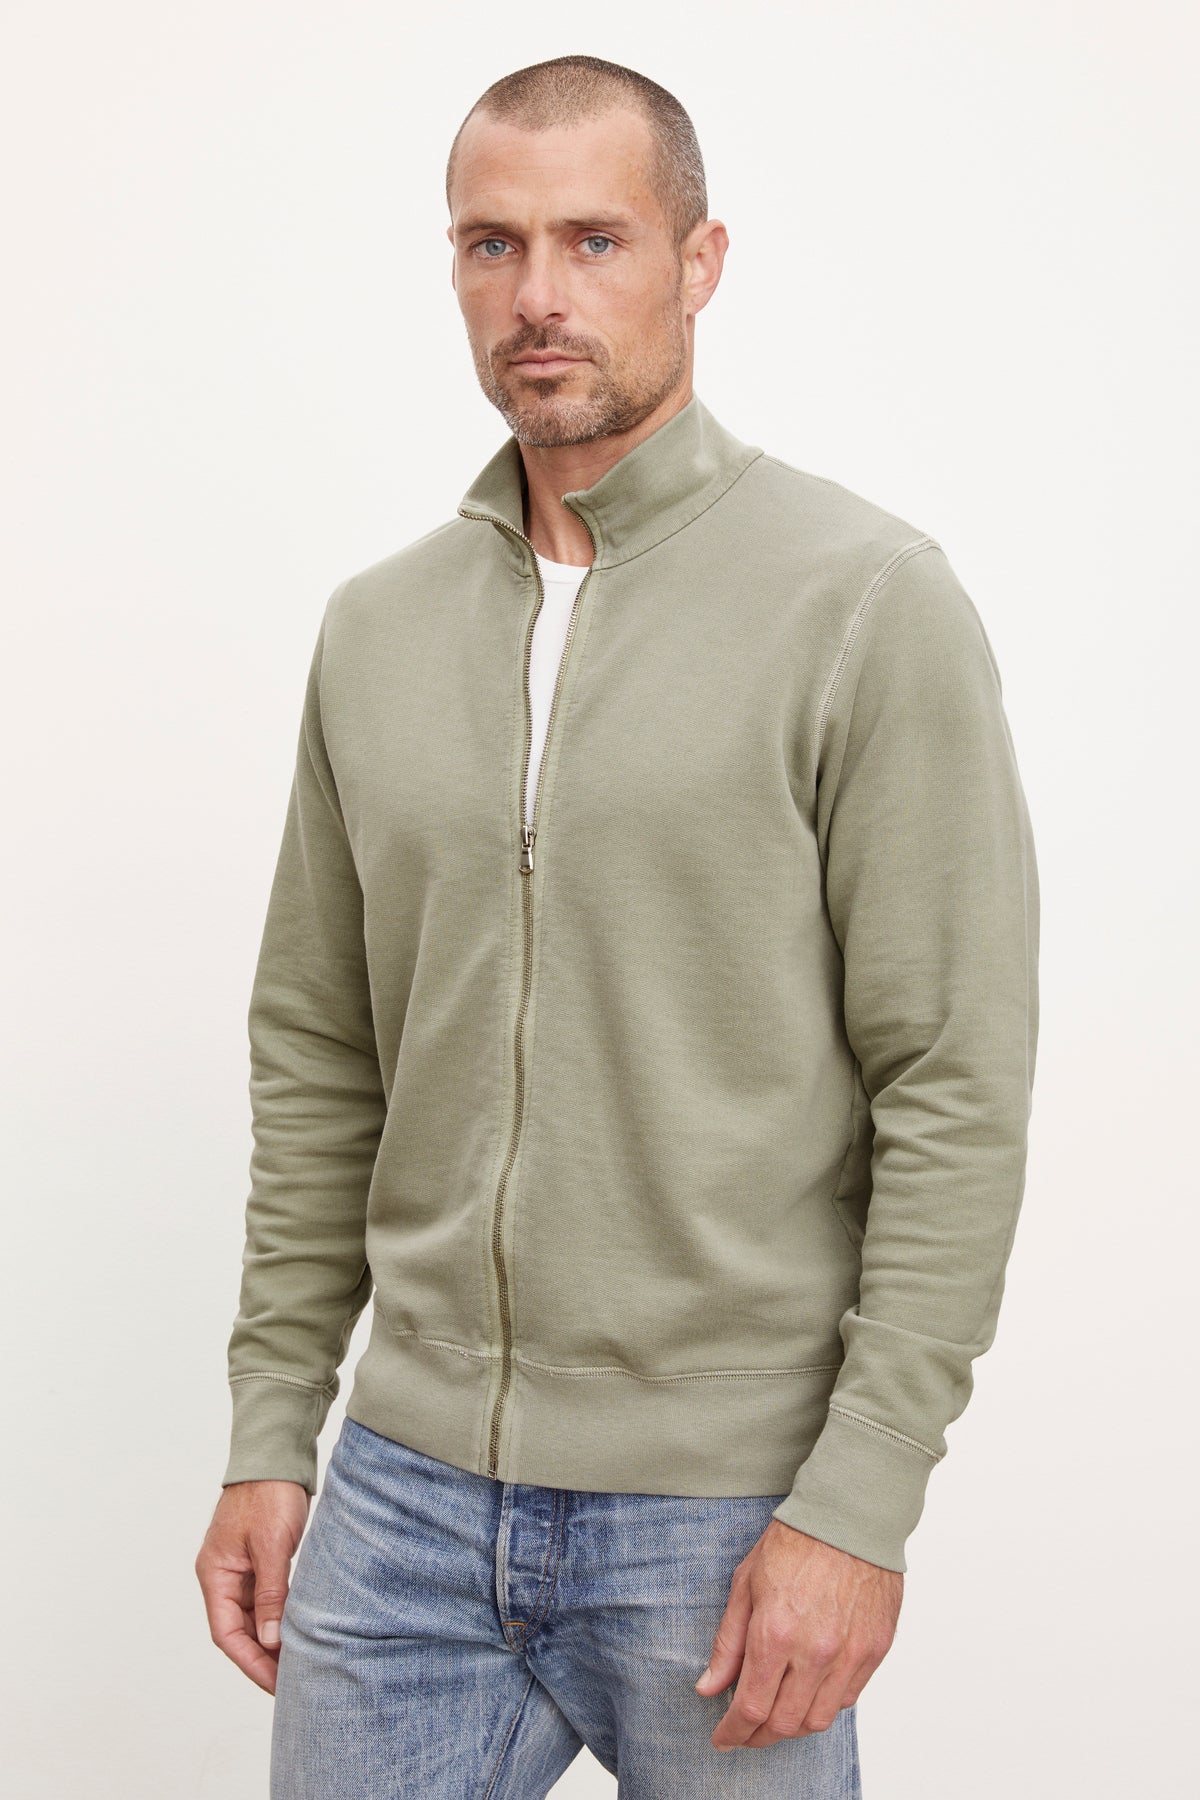   A man wearing a green Velvet by Graham & Spencer TERRY FRENCH TERRY FULL-ZIP sweatshirt and jeans. 